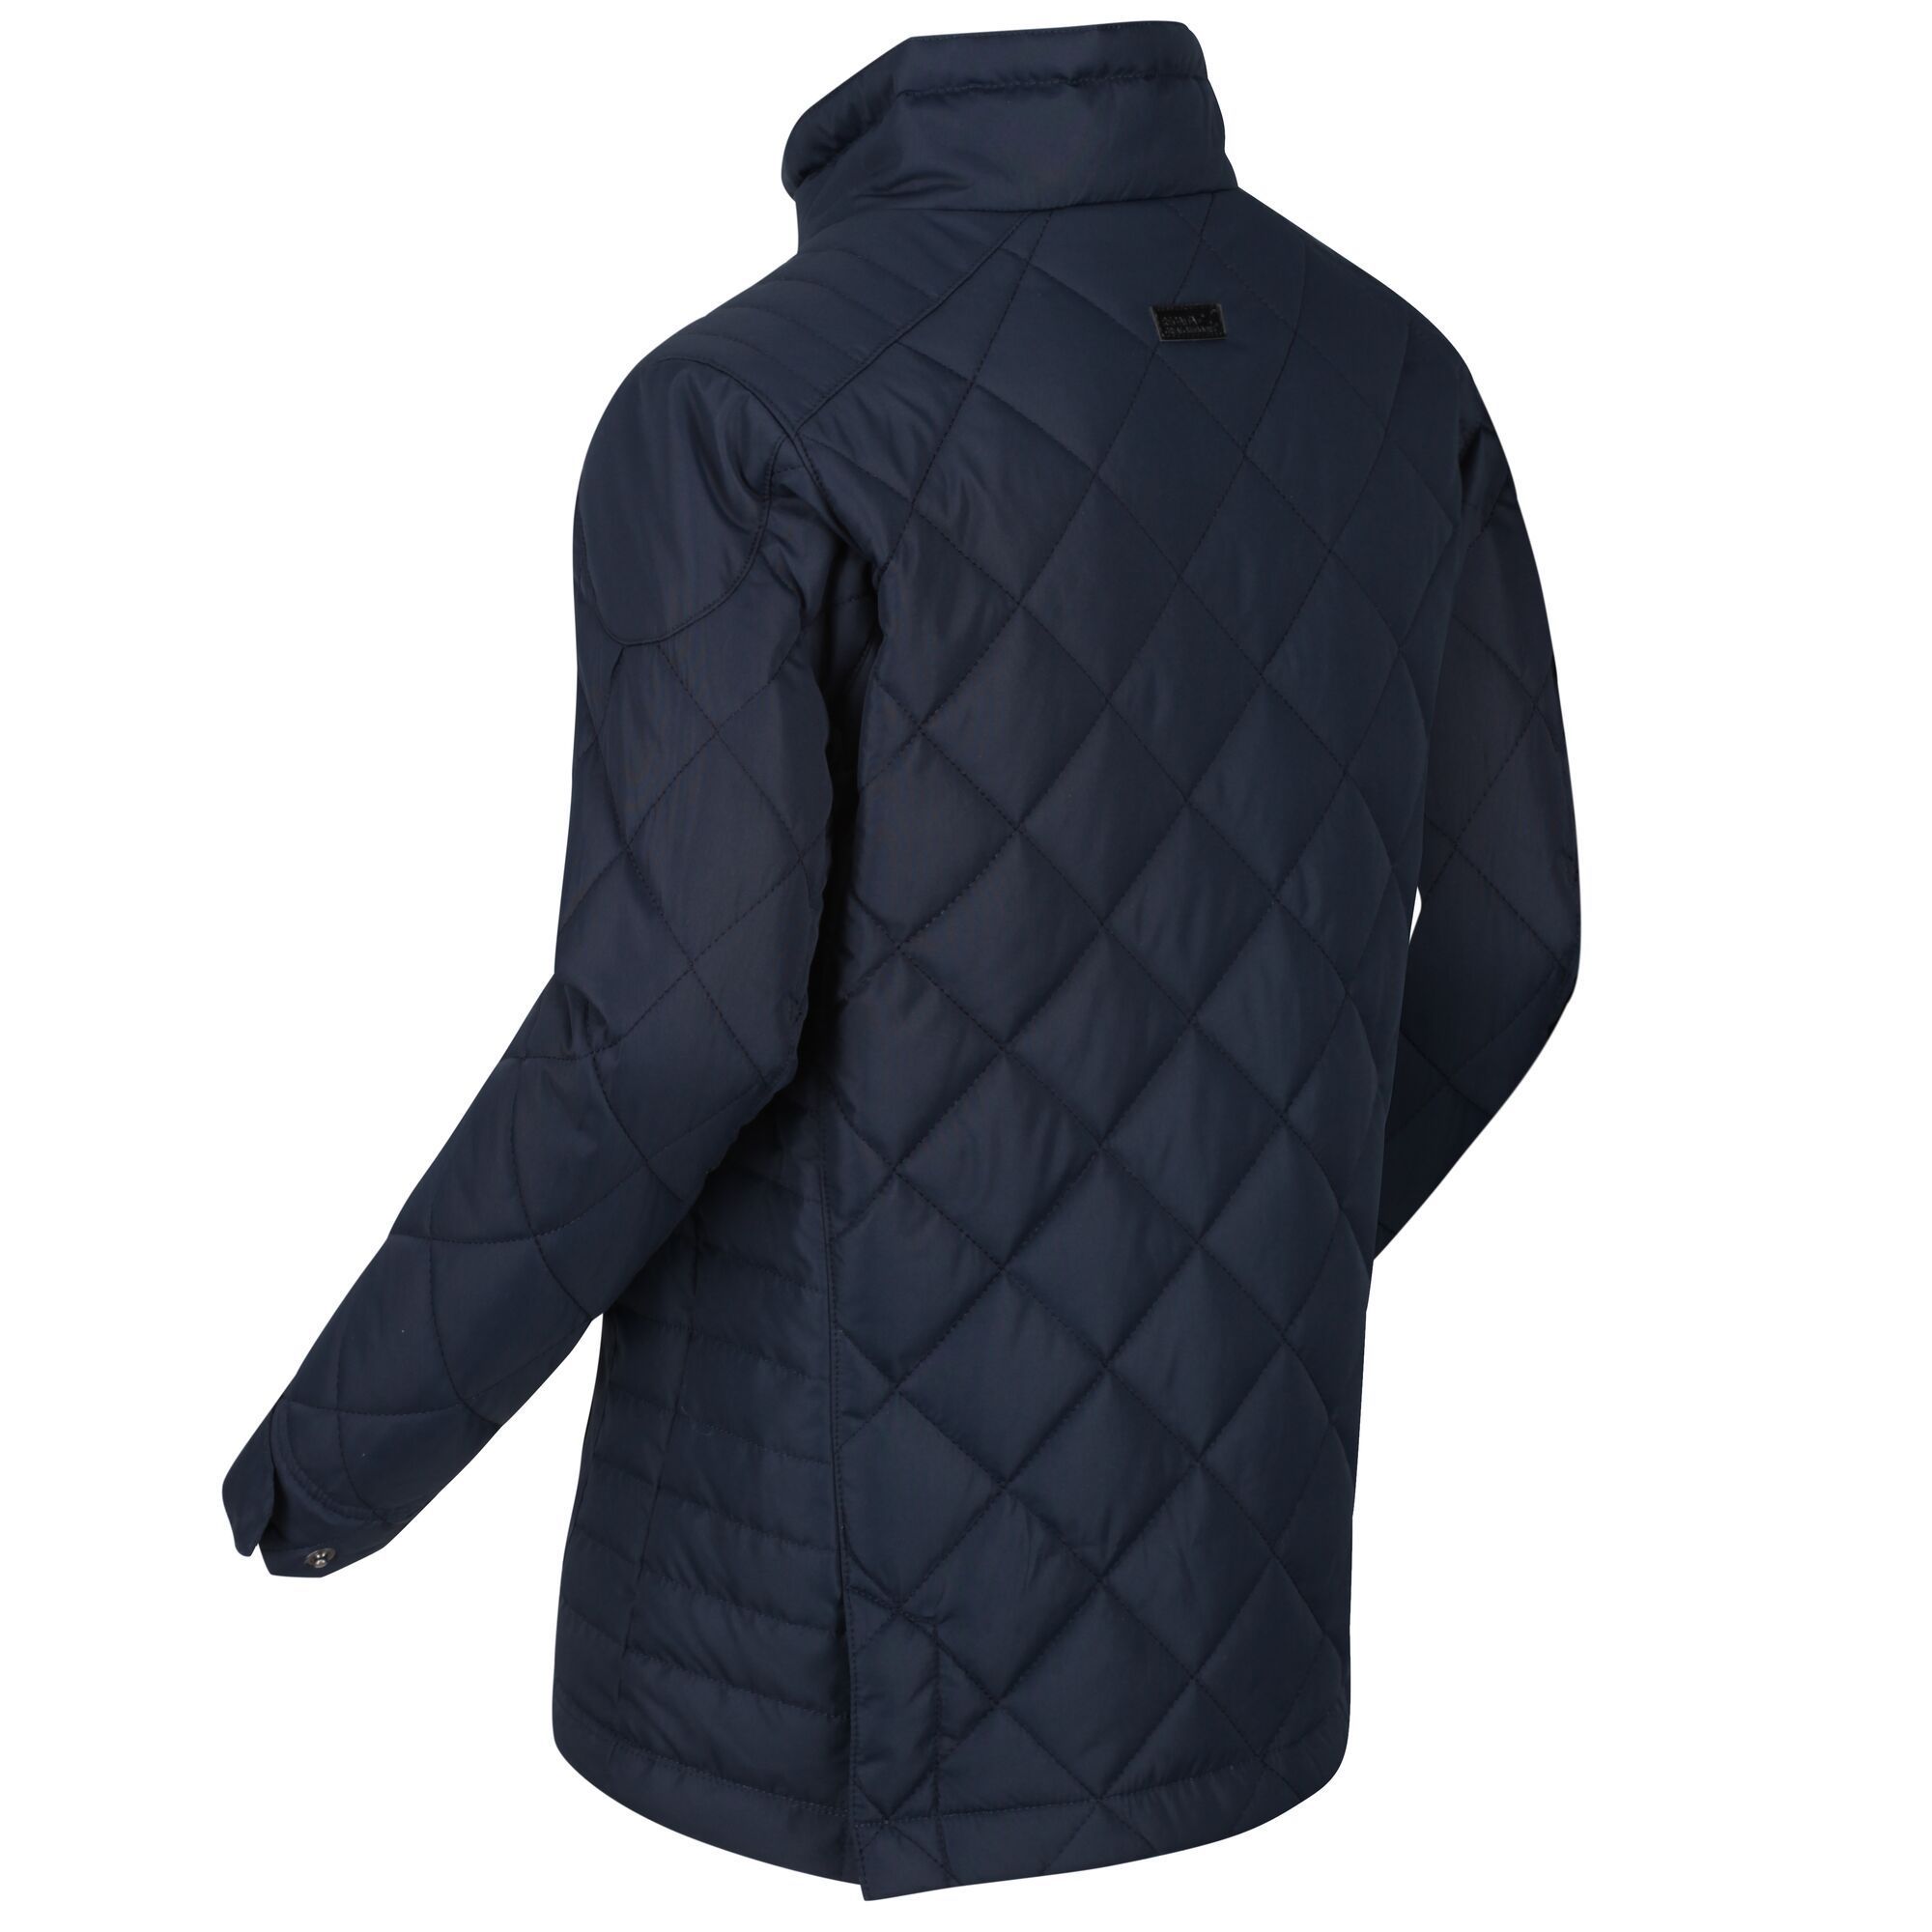 Material: 100% polyester. Water repellent quilted micro poplin fabric. Thermo-guard insulation. 100% polyester taffeta printed lining. 2 x lower patch pockets with branded snap fastenings. Back vents with stud fastening.